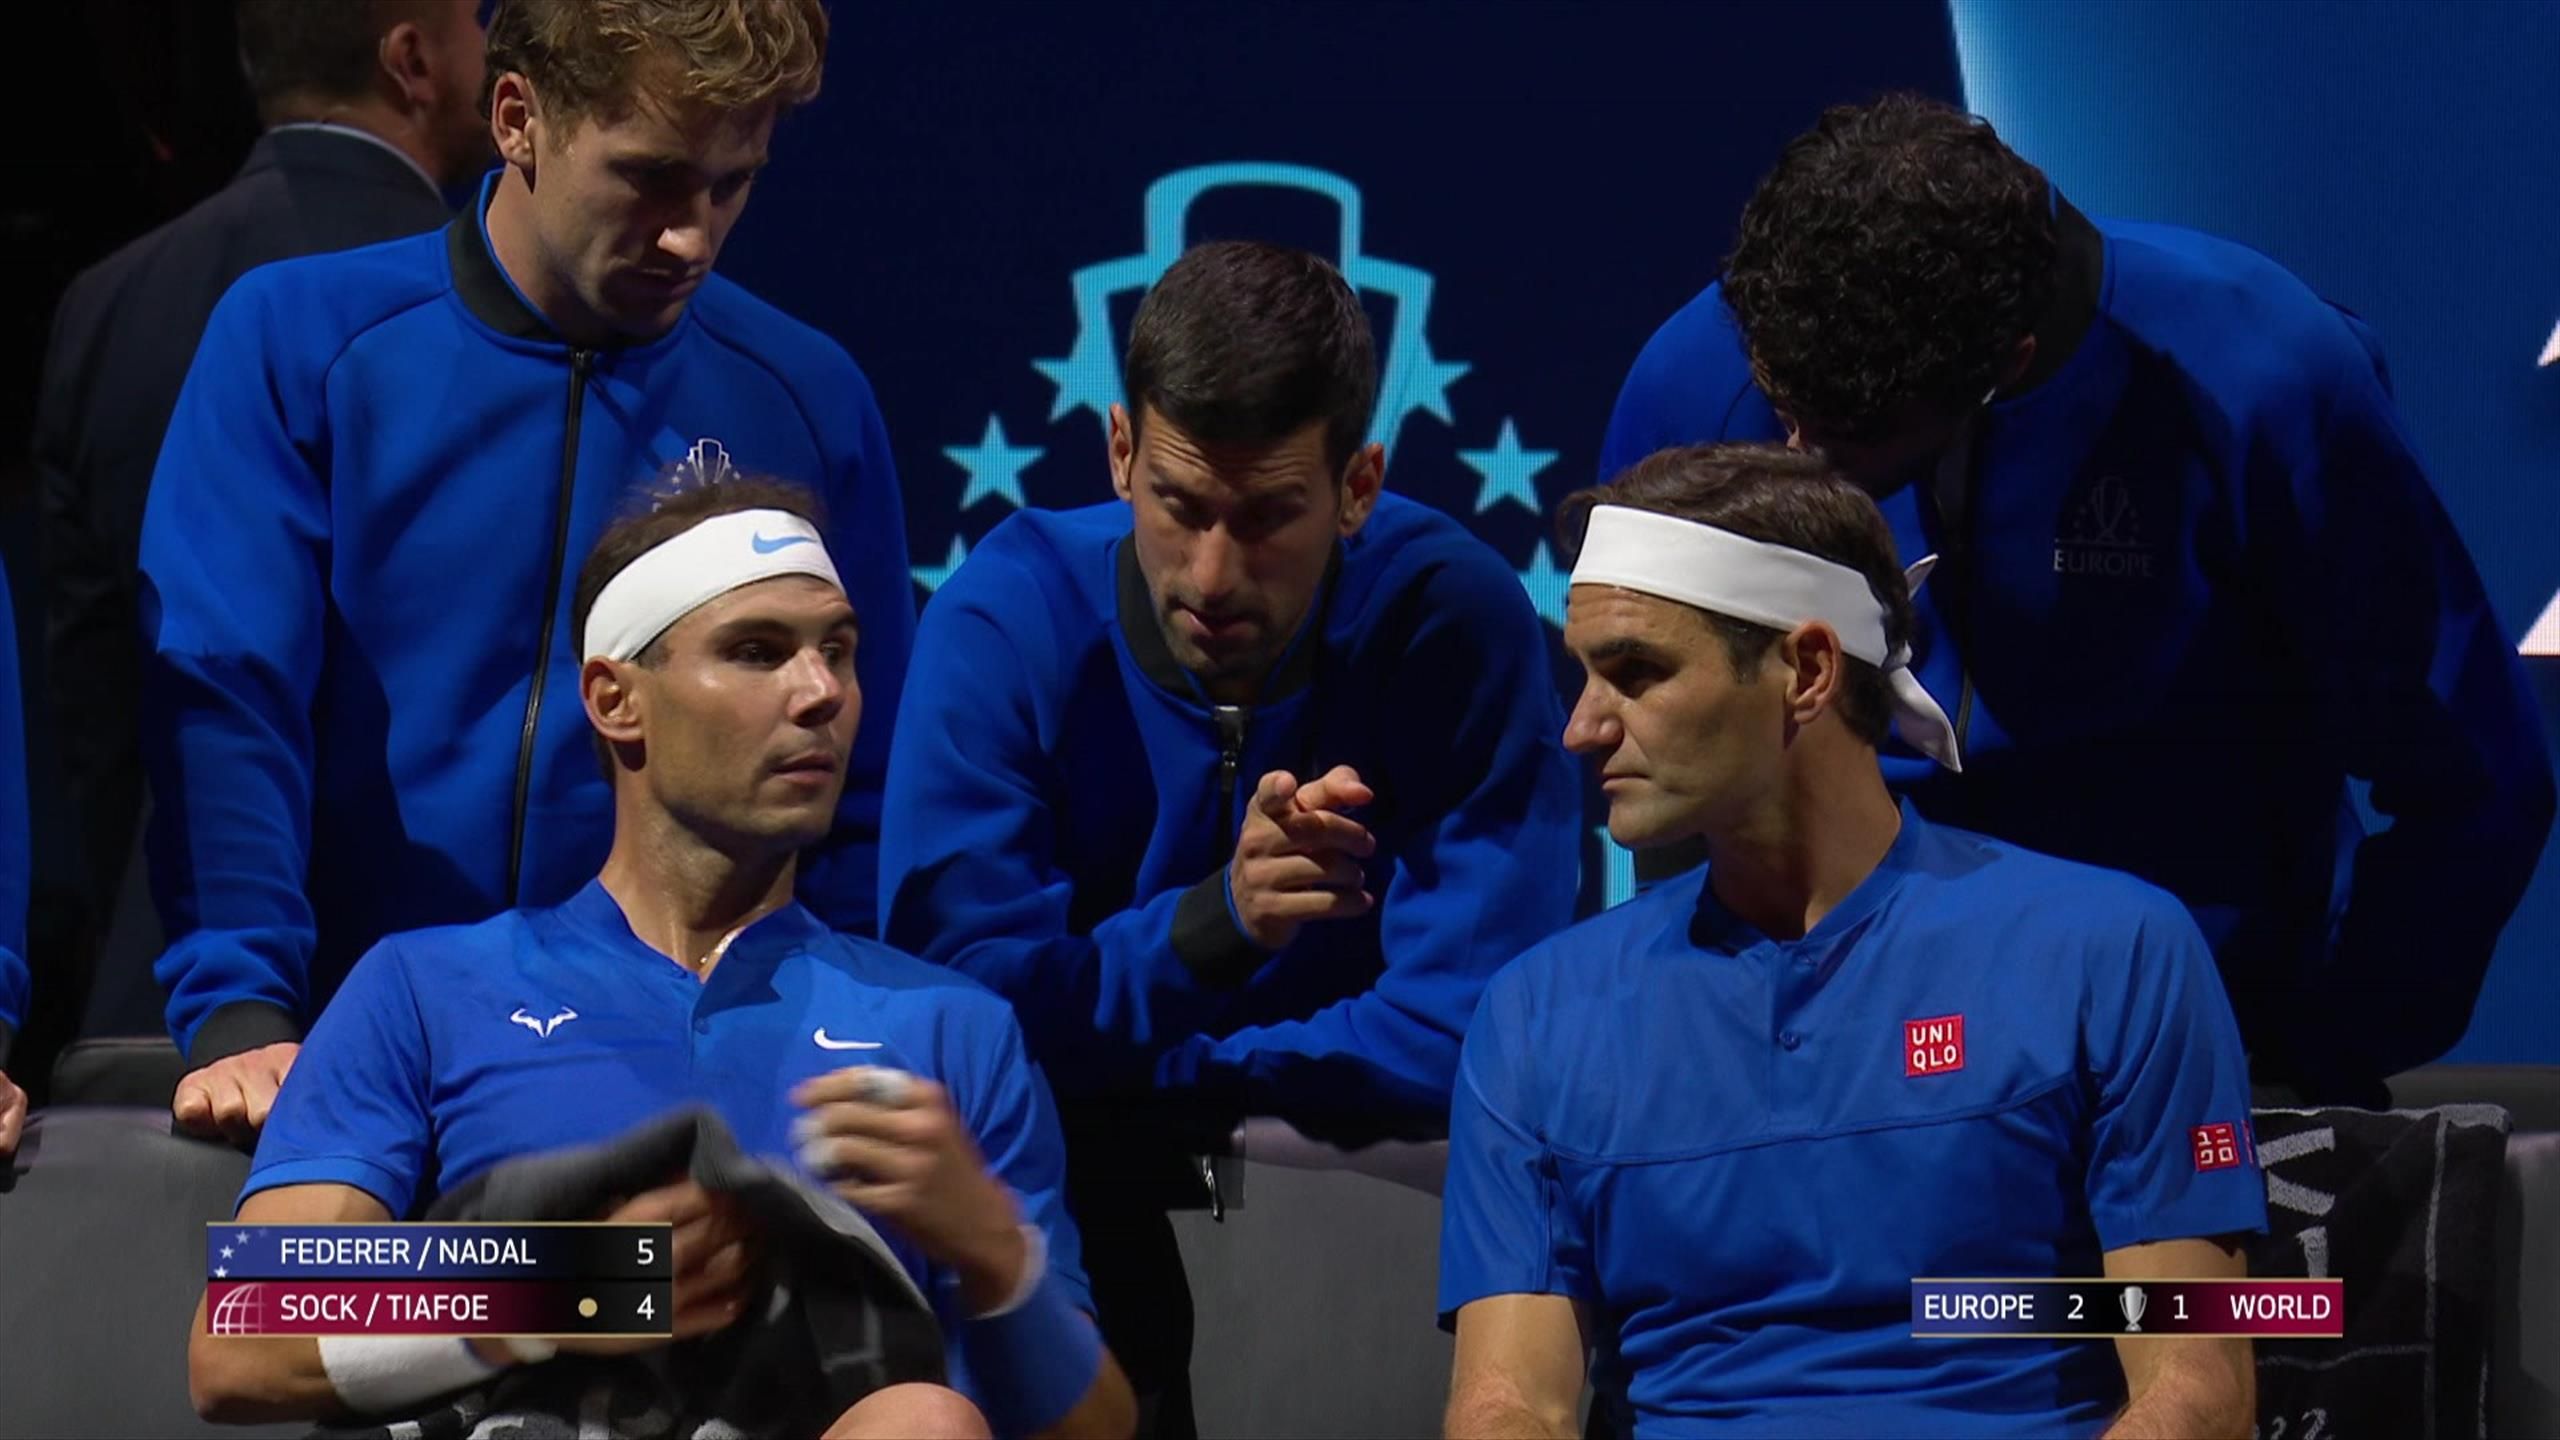 WATCH - Novak Djokovic coaches Roger Federer and Rafael Nadal as GOATs unite in Laver Cup doubles - Tennis video